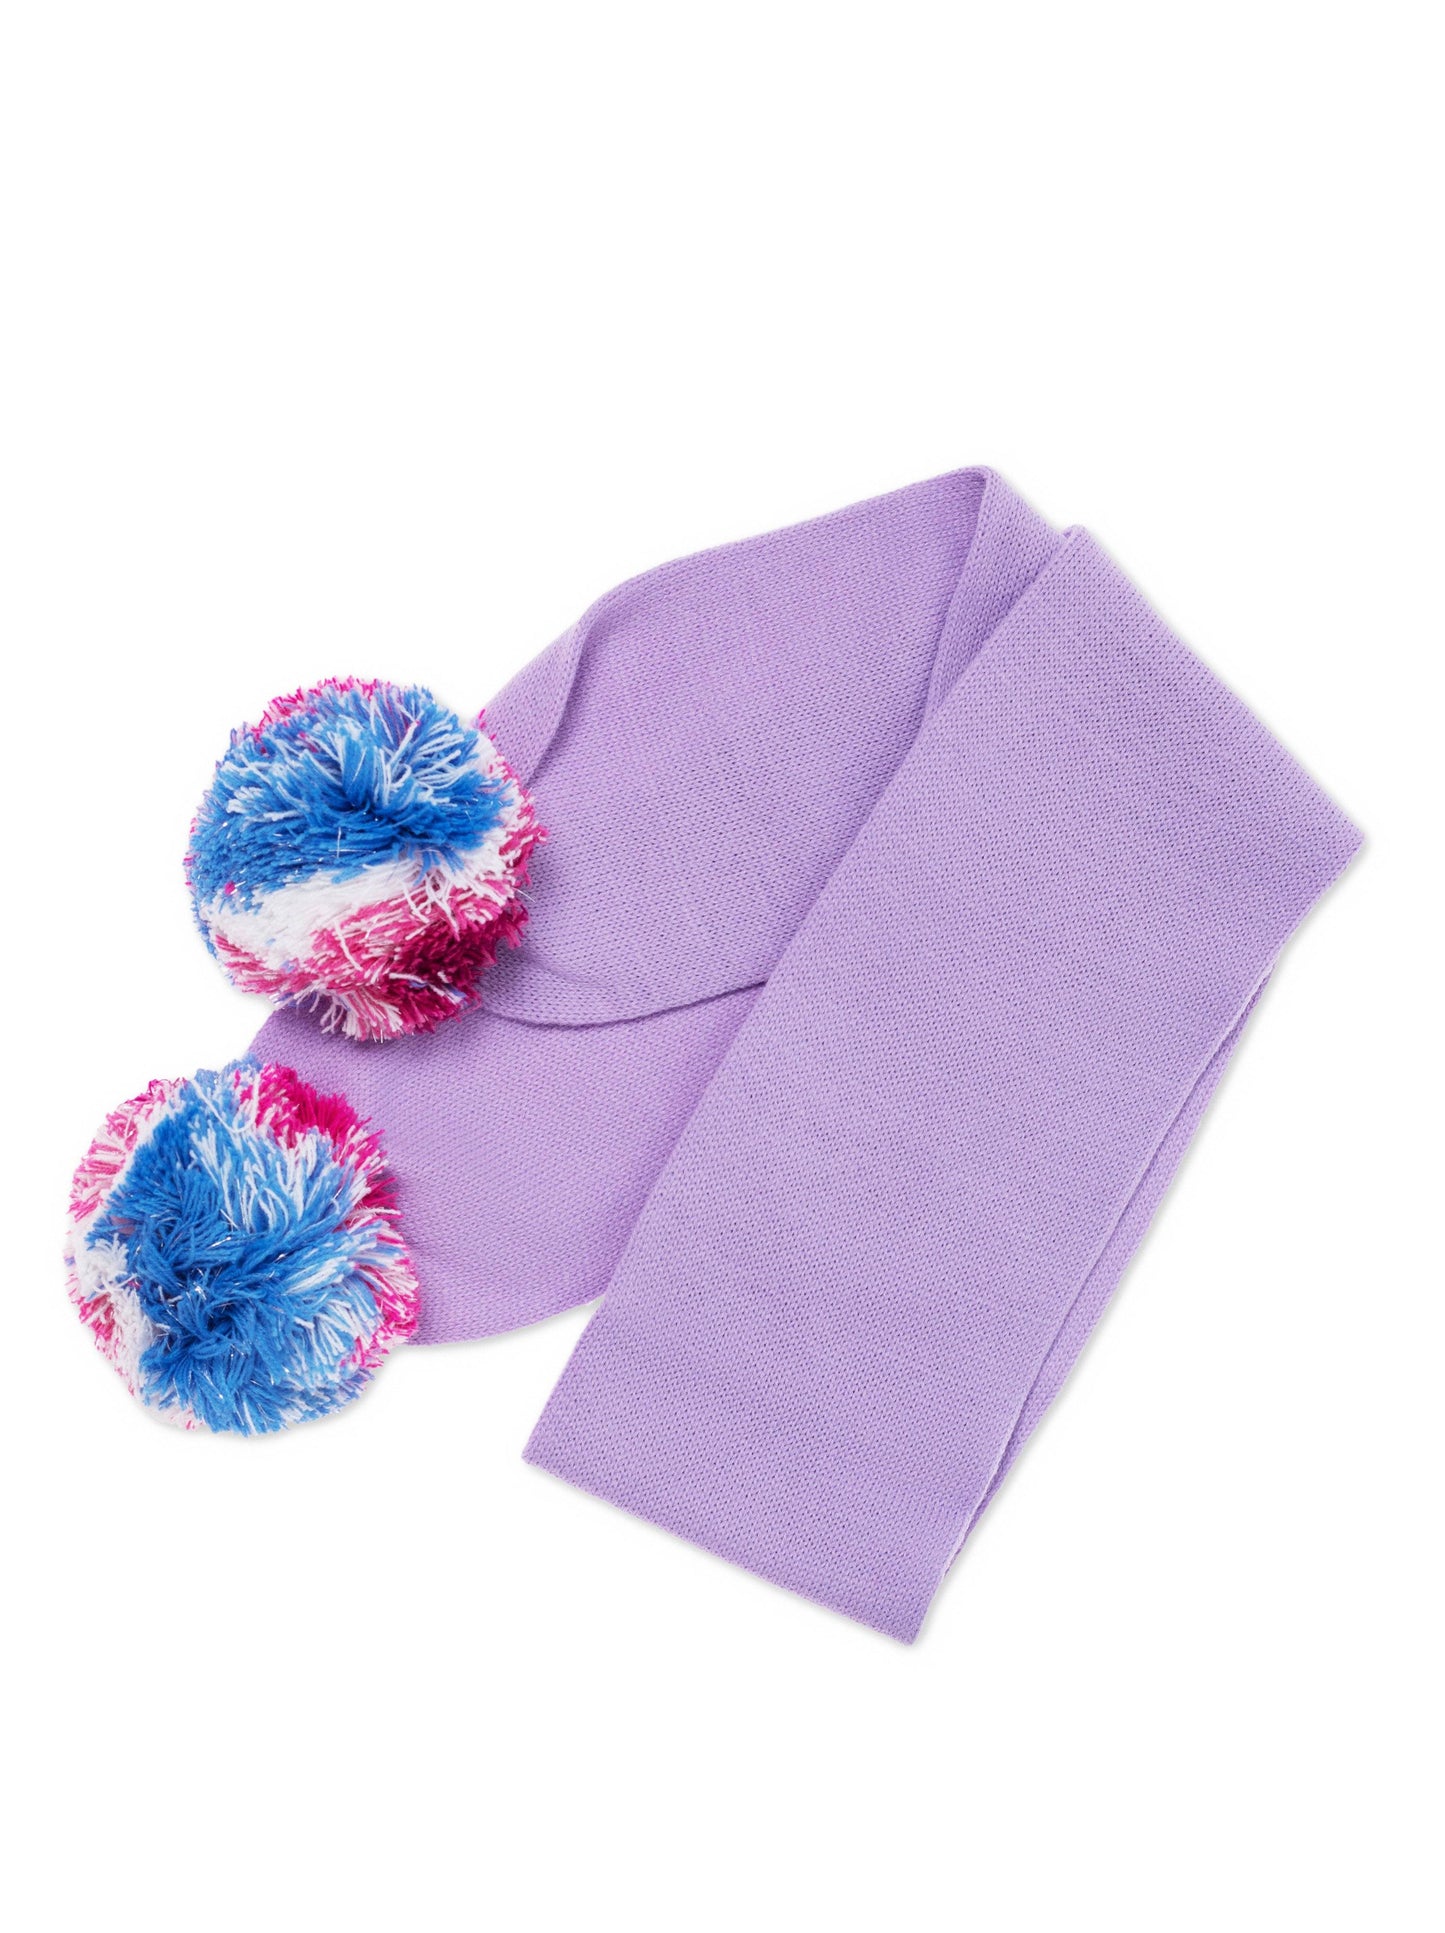 Conte/Esli Knitted Children's Set (Cap and Scarf) - For Girls (17С-95СП) & (17С-184СП)